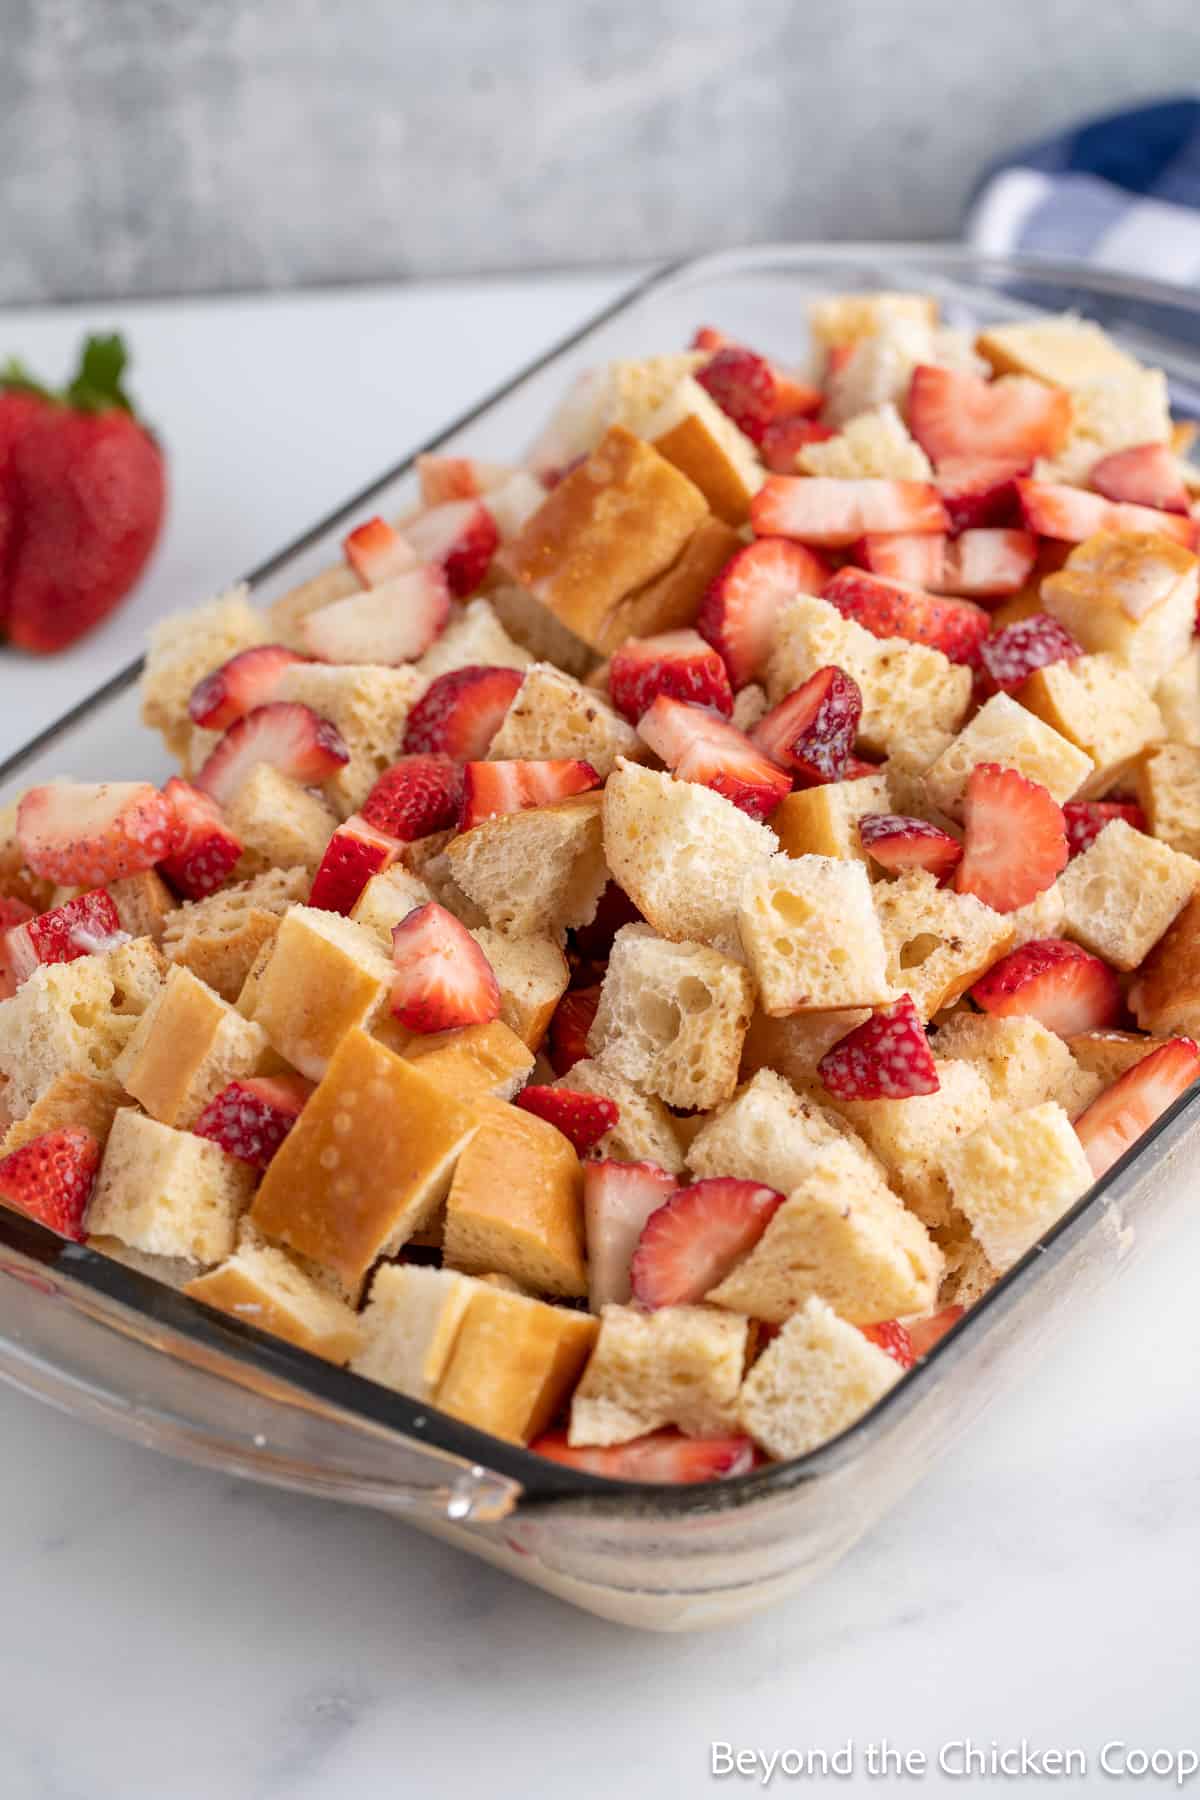 Bread cubes and strawberries in a baking dish.